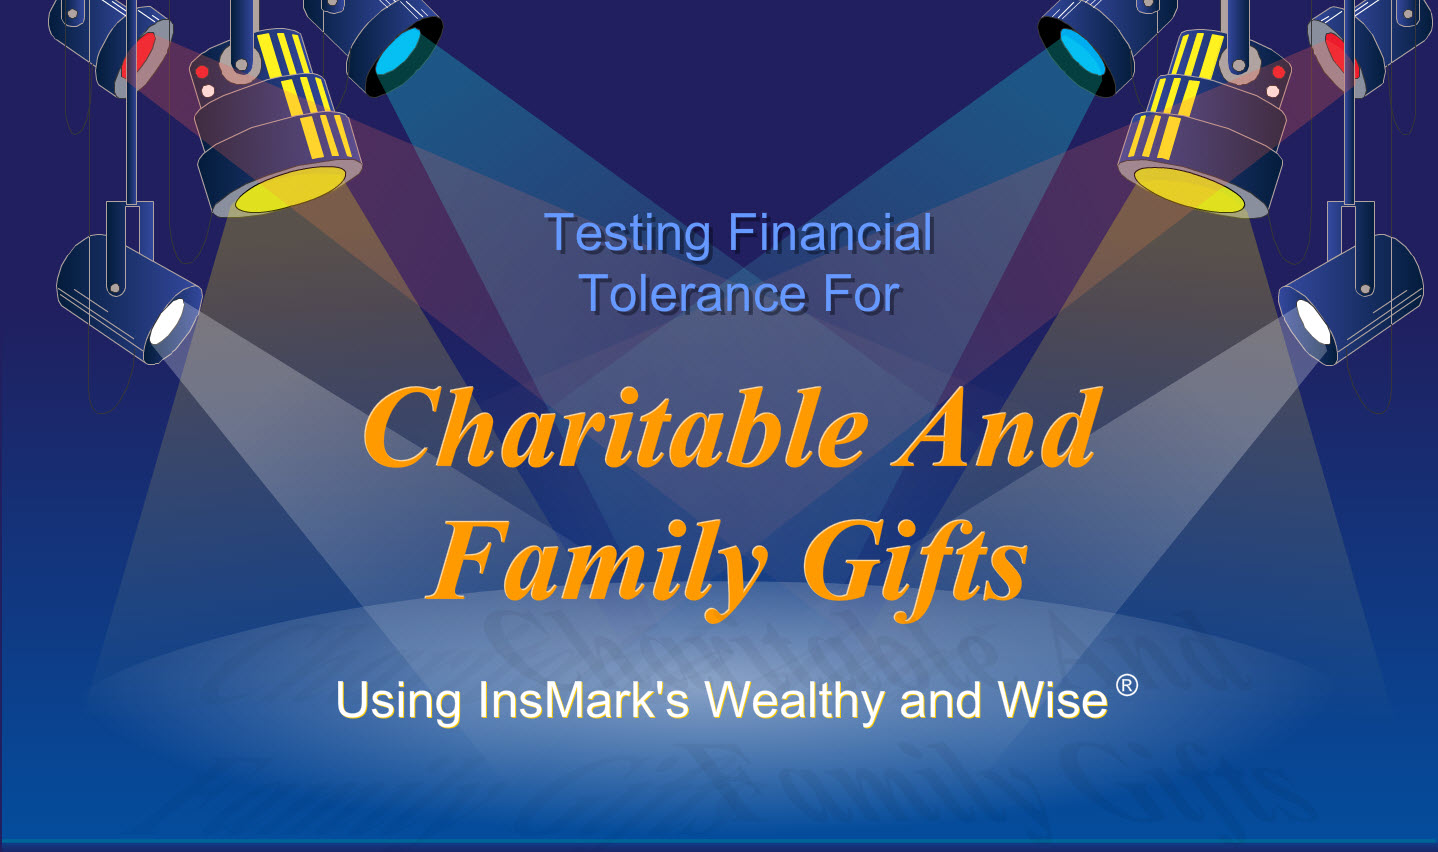 Charitable and Family Gifts